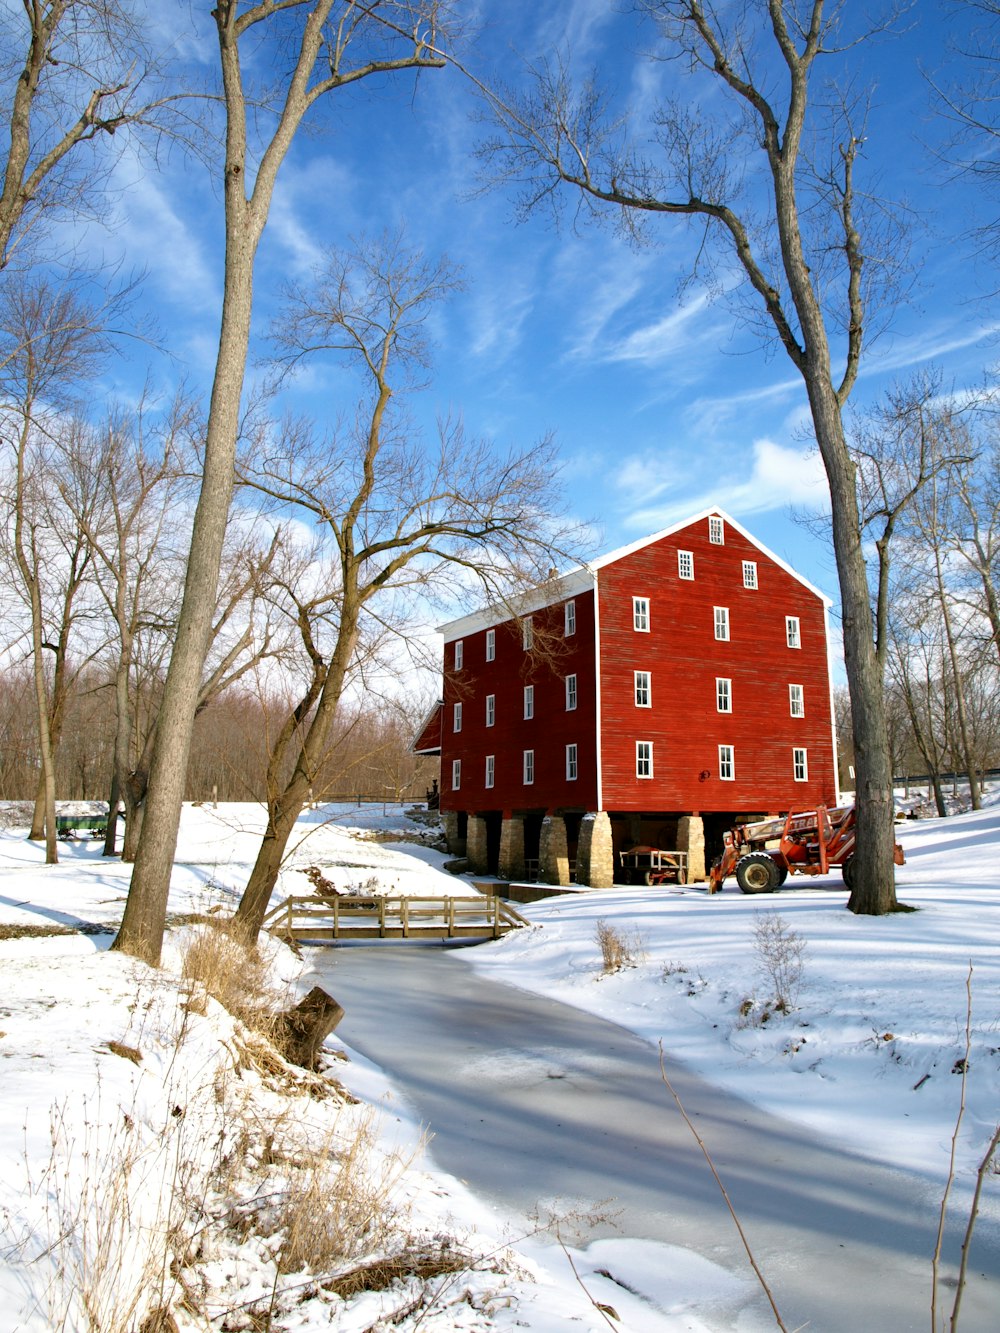 a red barn in the middle of a snowy field